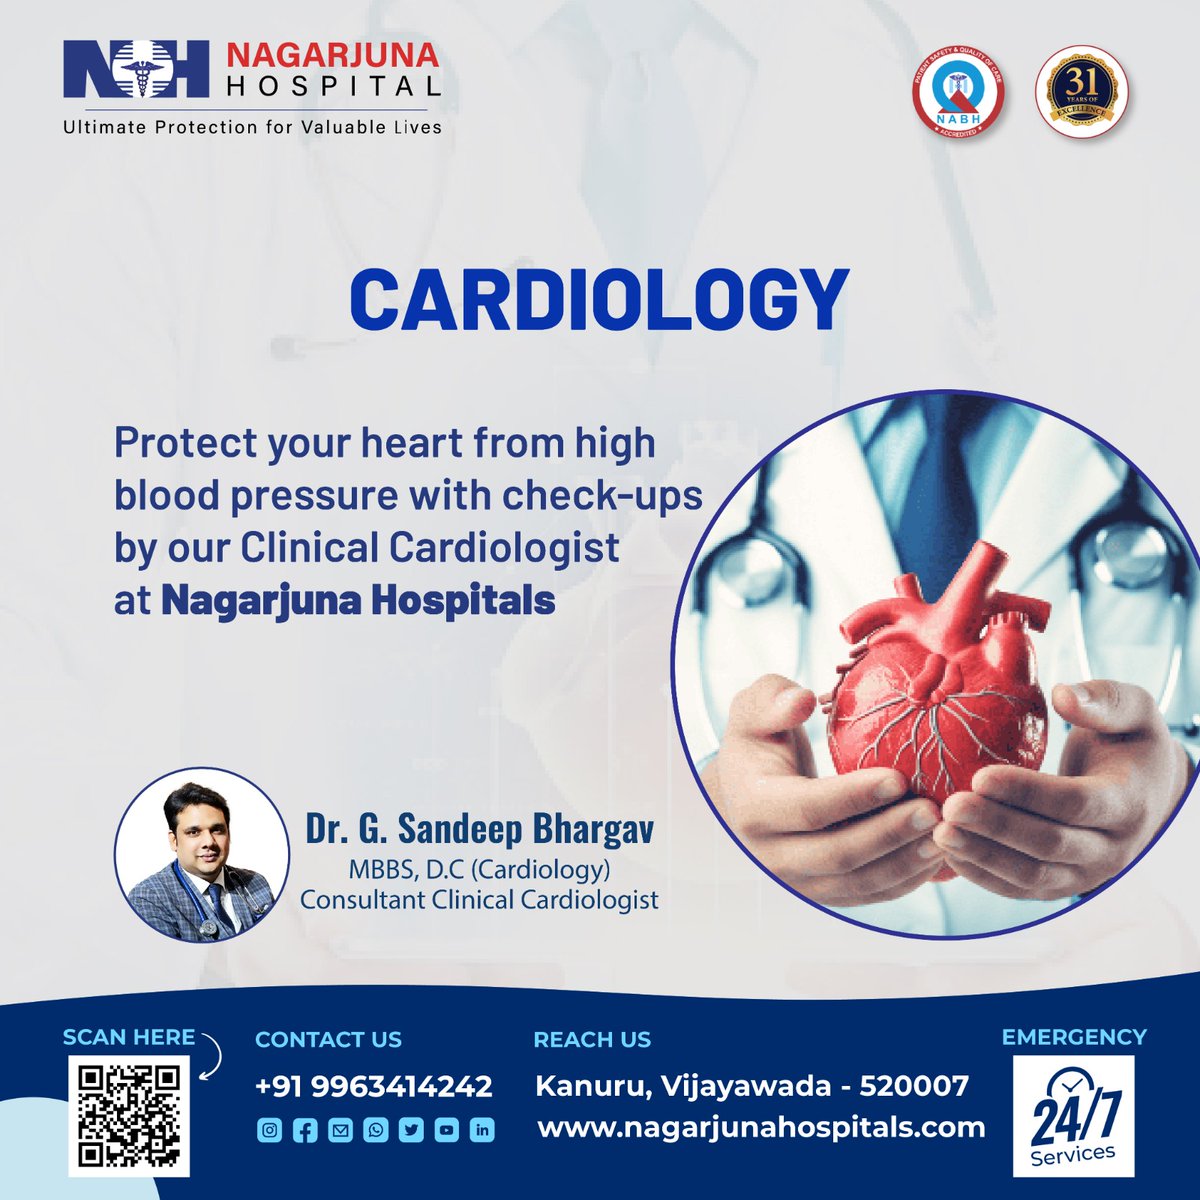 #doctors #medical #hospitals #nagarjunahospitals #Cardiology #doctorconsultation #CheckUp #Care #cure #CardiacCare #cardiologist #cardiology #hearthealth #heart #24x7Emergency #life #emergency #Treatment #healthpackage #vijayawada #contactustoday